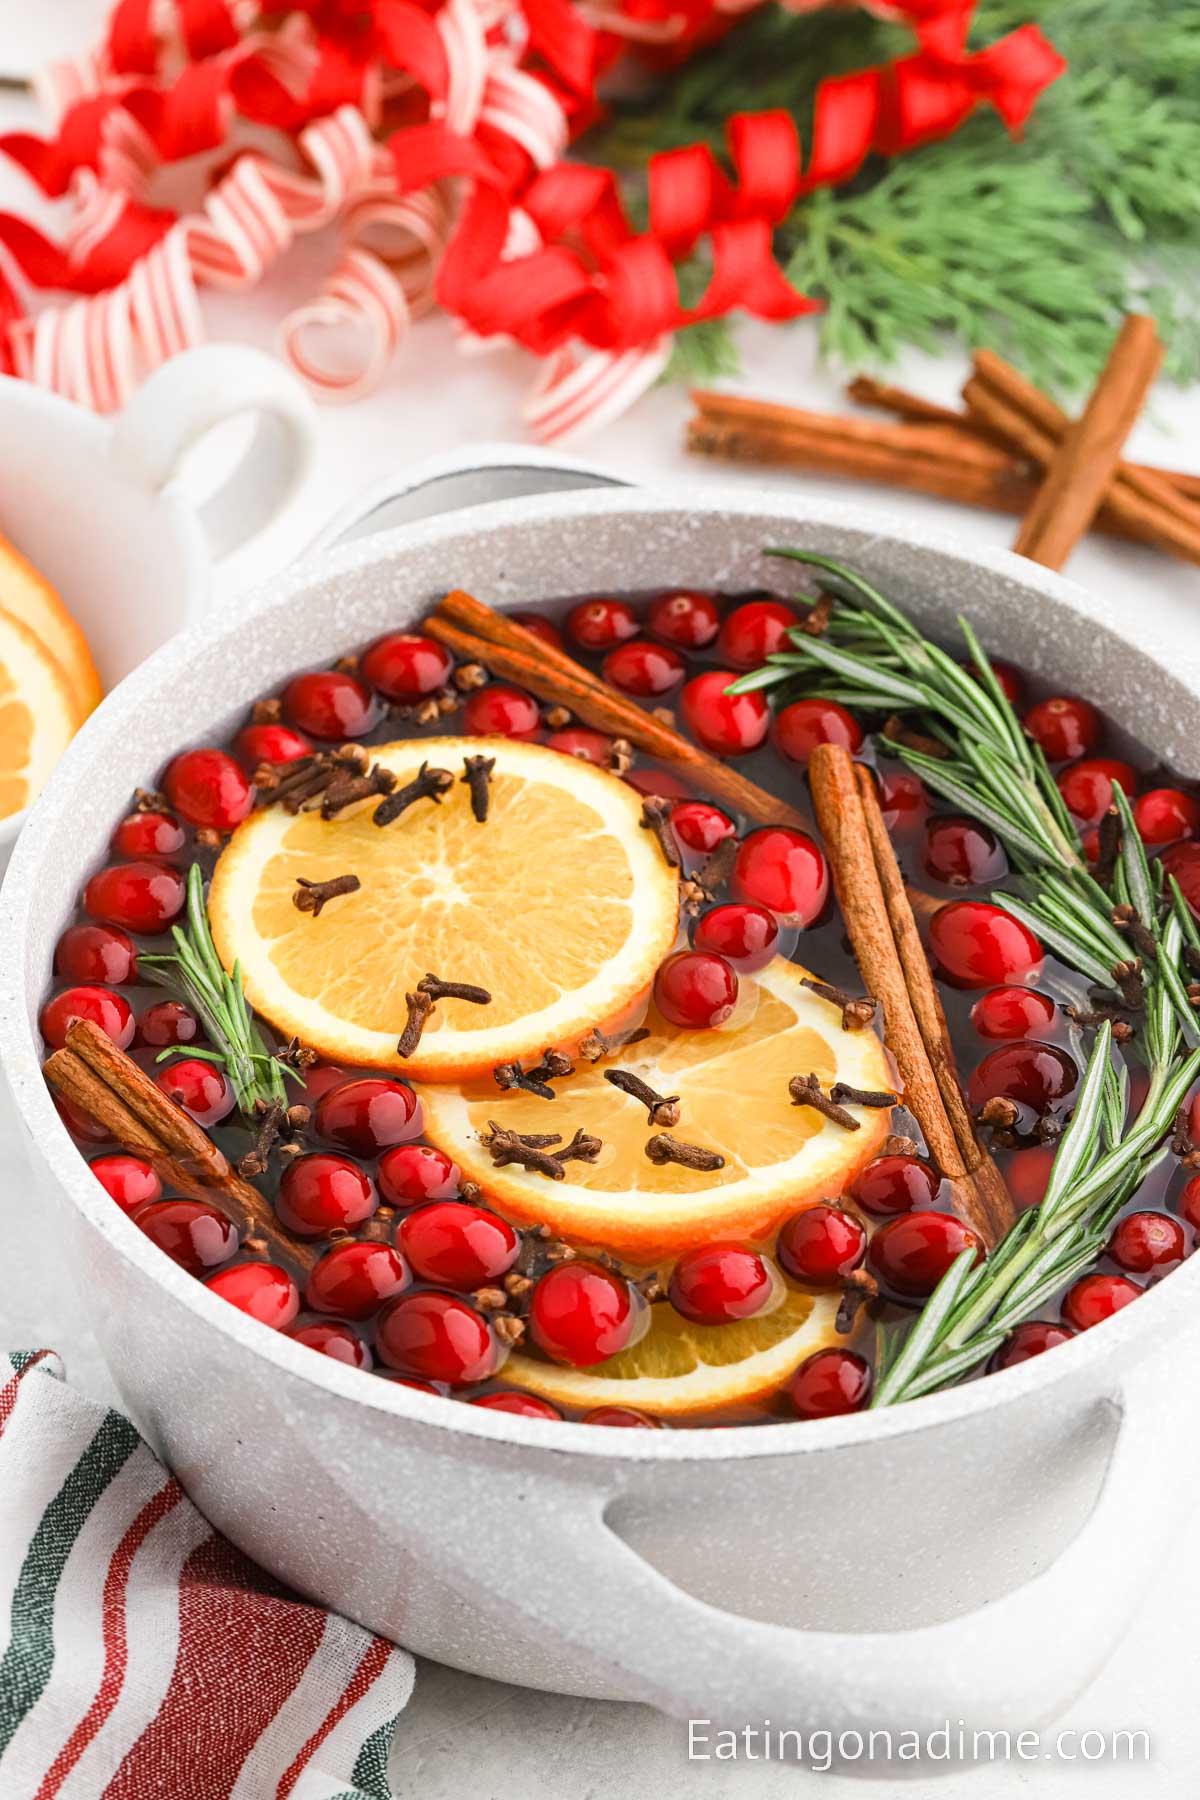 6 Intoxicating Fall and Christmas Stove-top Potpourri Recipes